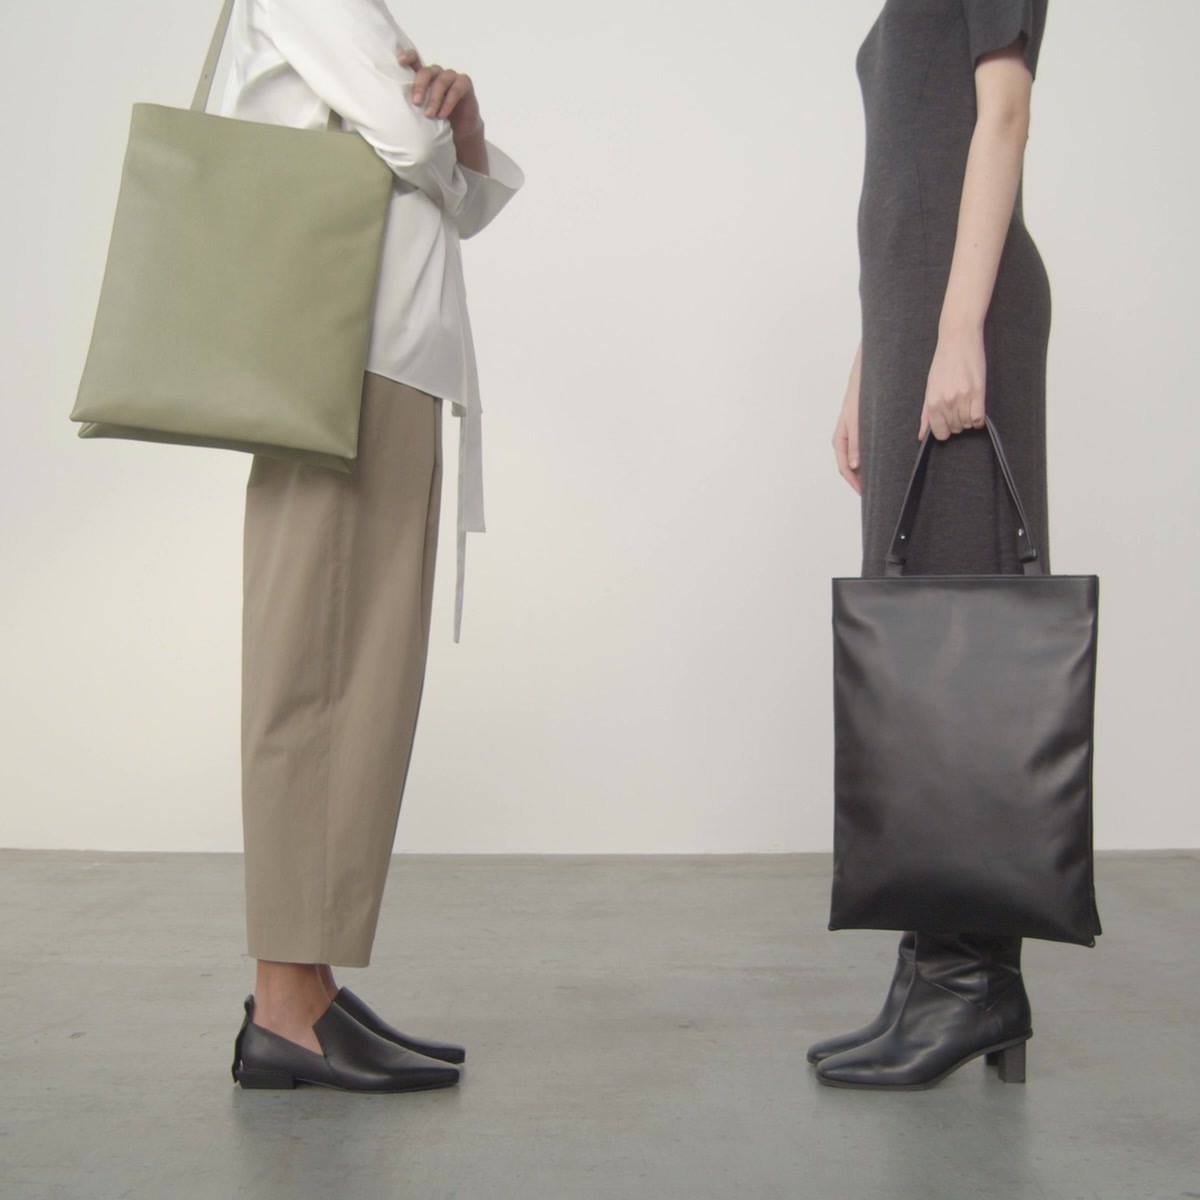 The leather tote bag: ​Wear across body, handheld, or on the shoulder - our multifunctional bags are adaptable to your day. ​ Shop large leather tote: festivalwalk